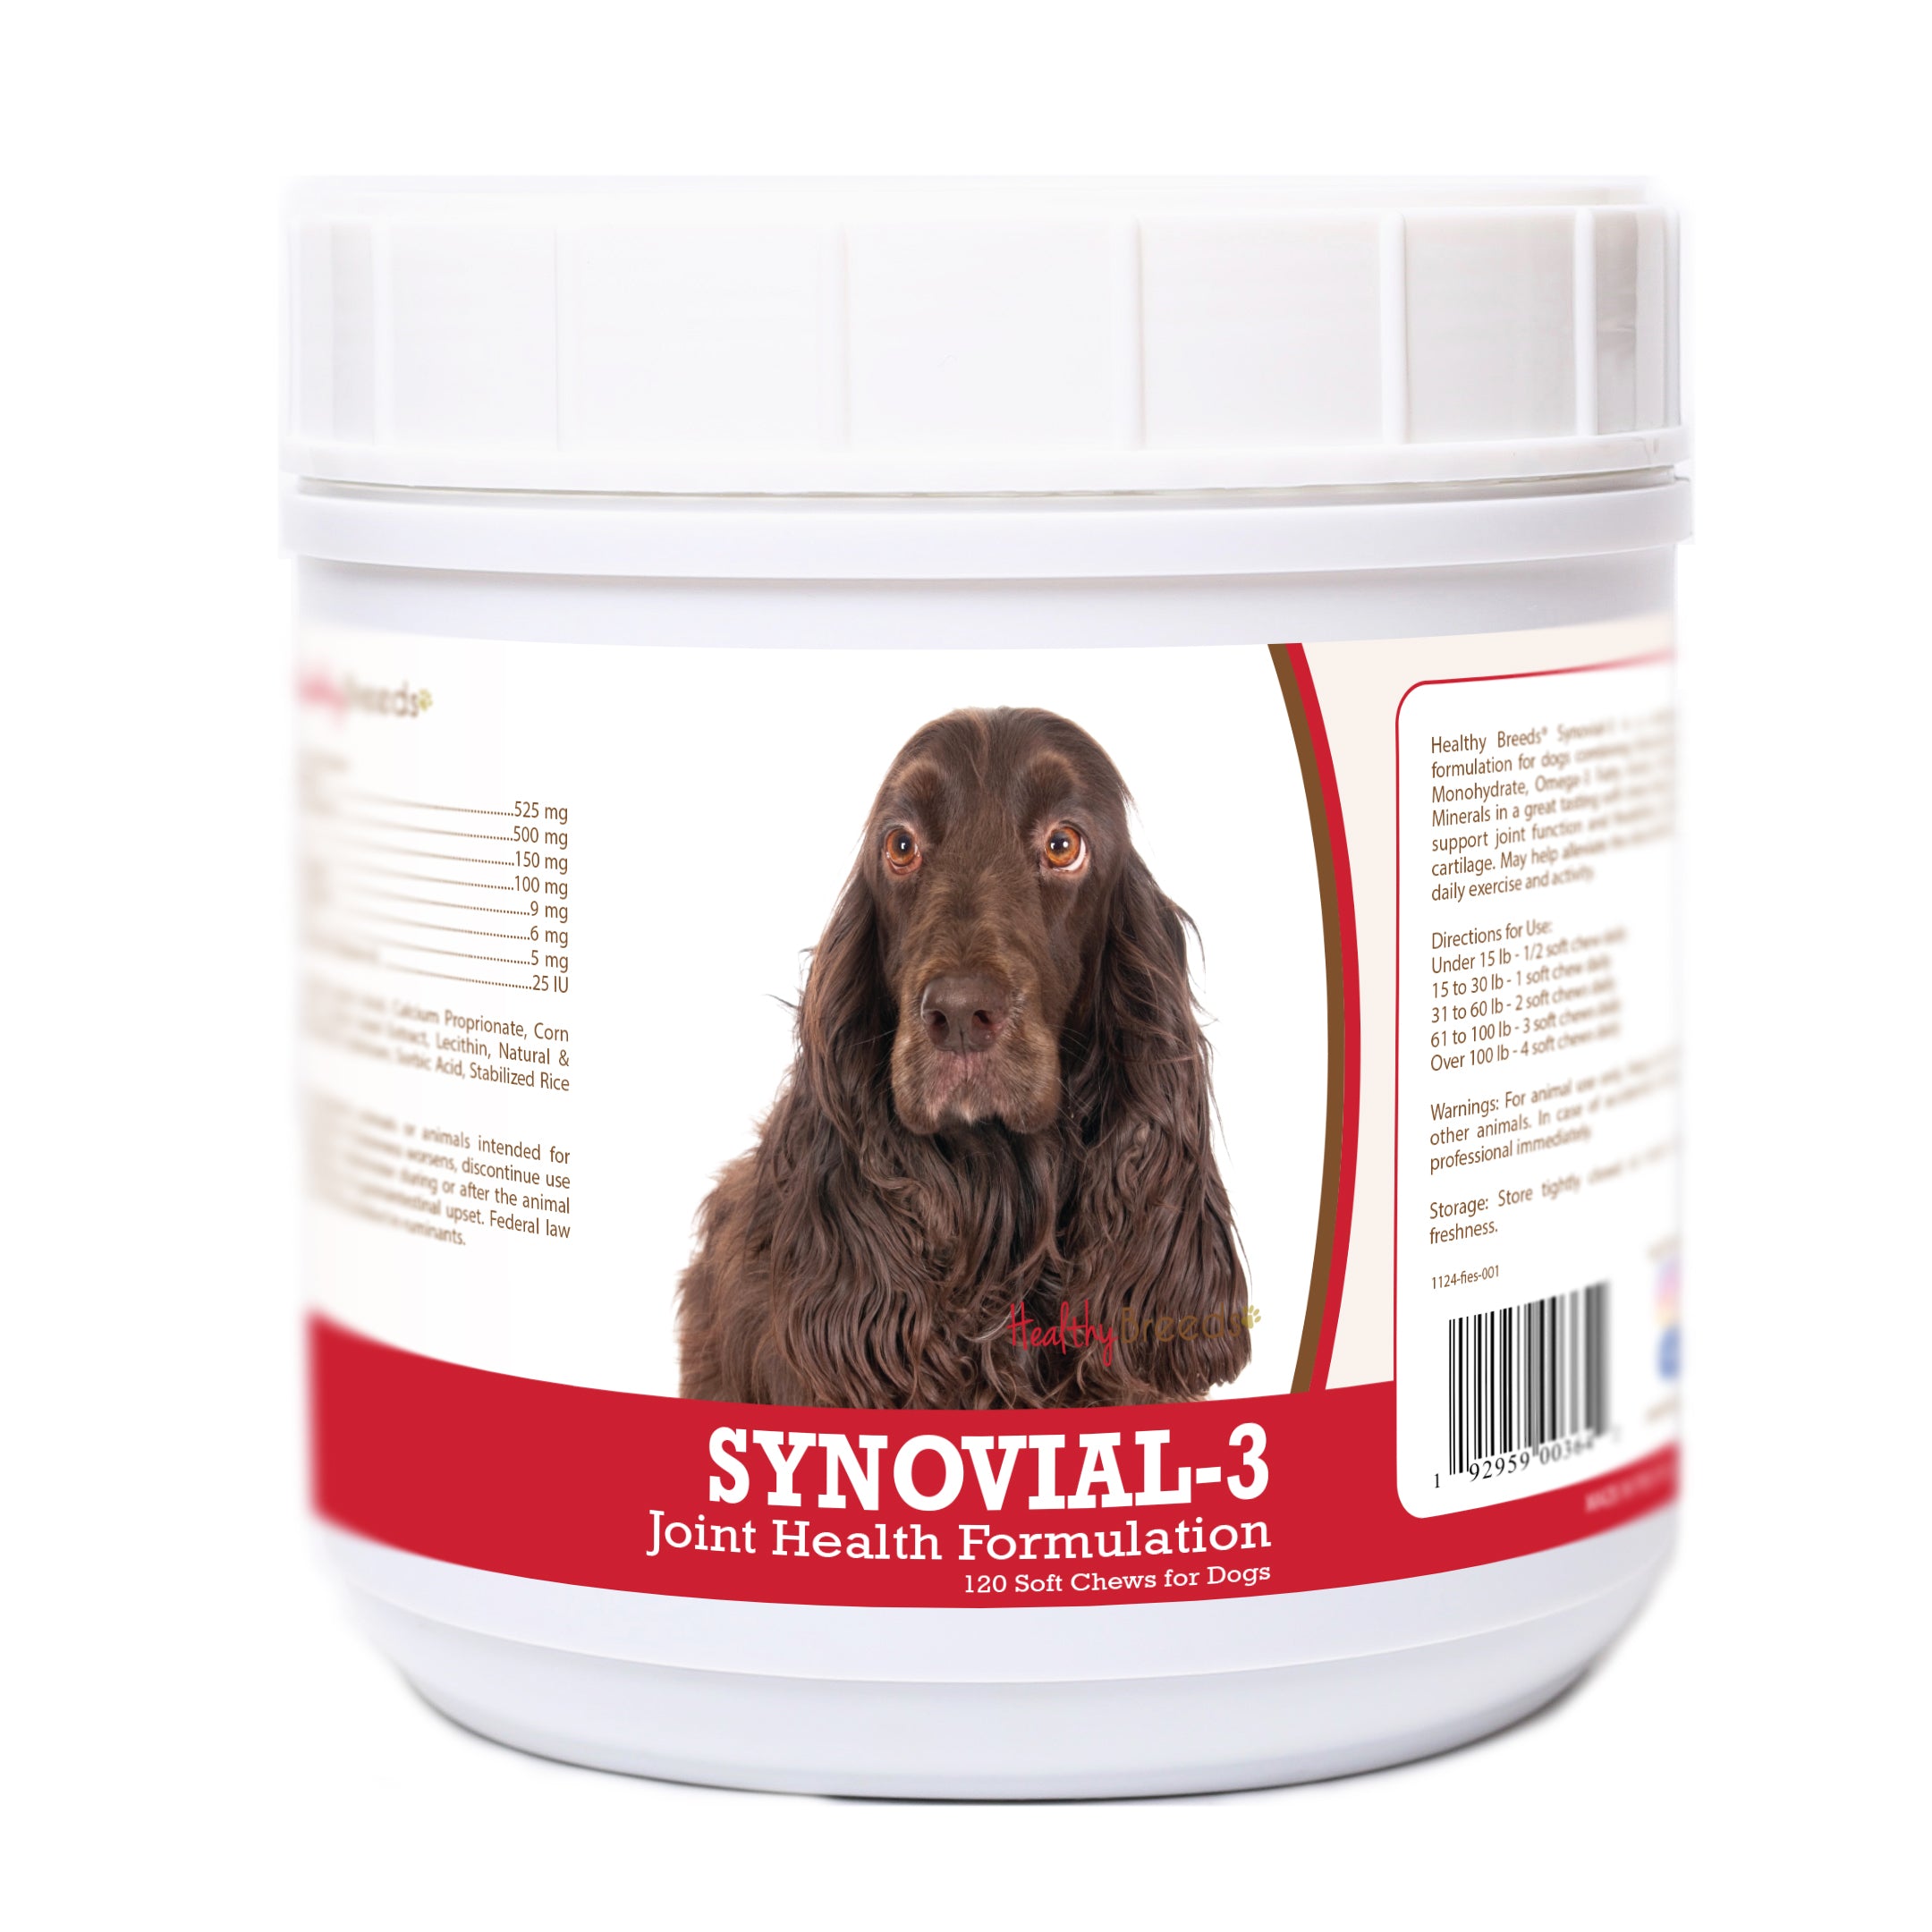 Field Spaniel Synovial-3 Joint Health Formulation Soft Chews 120 Count